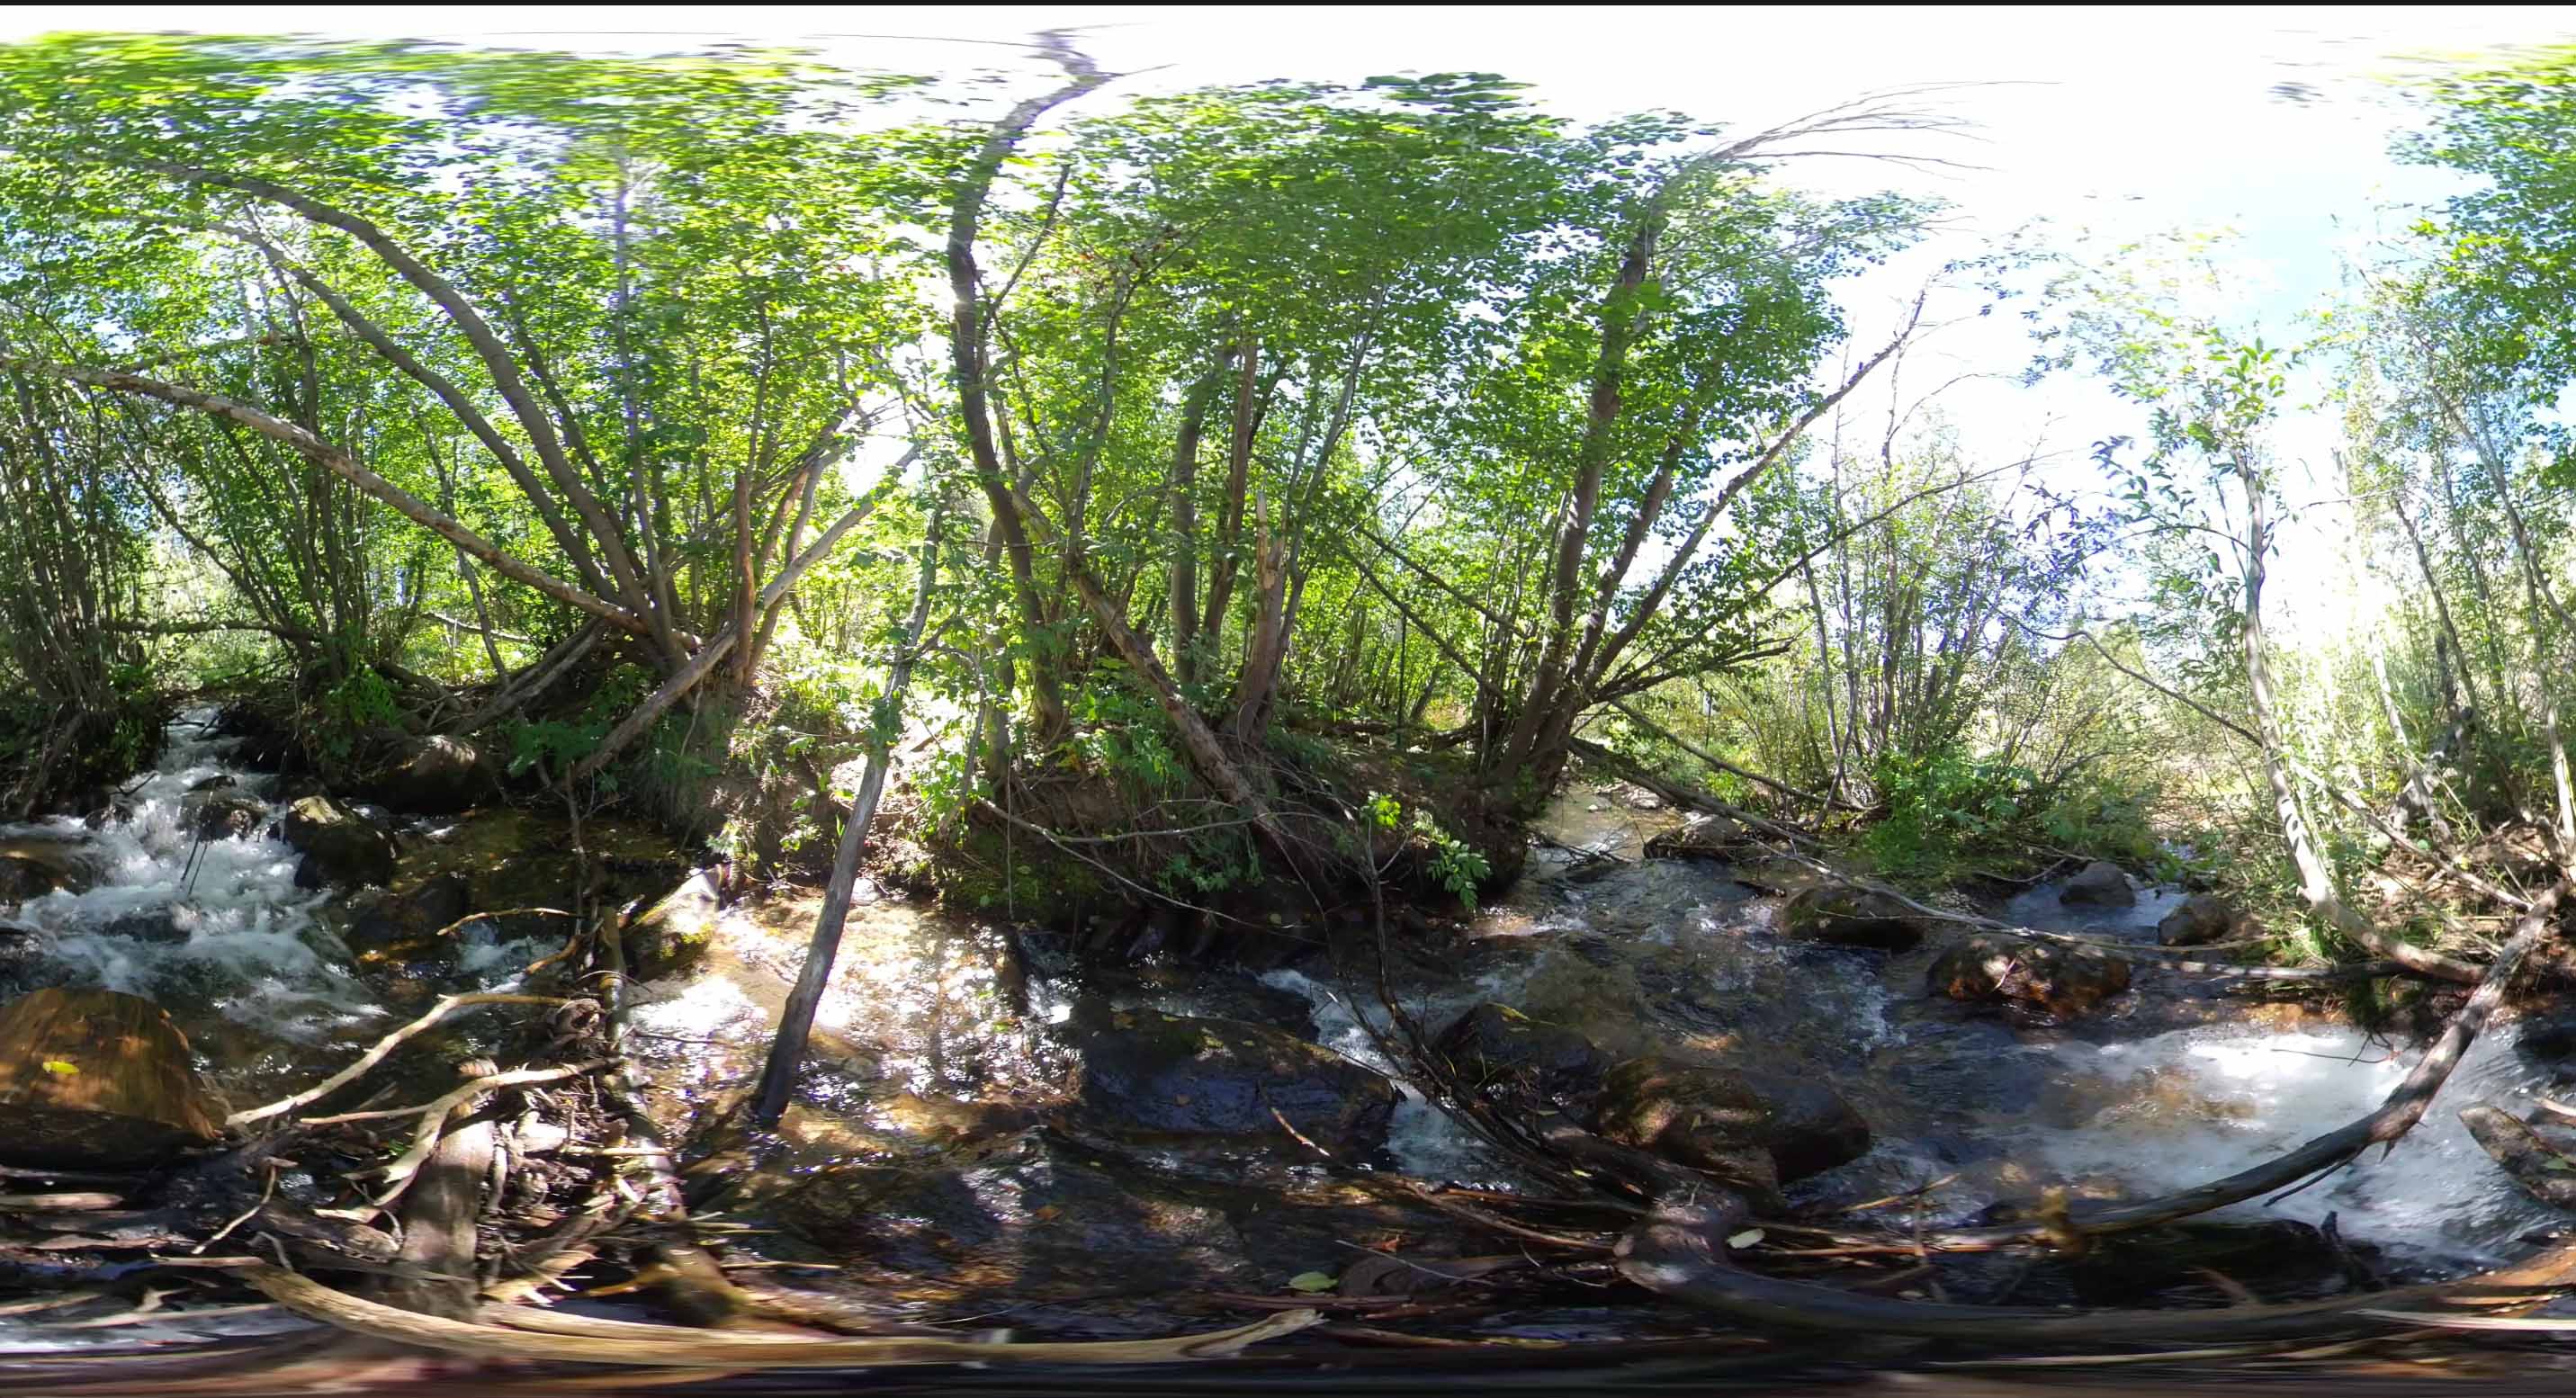 A wrap around image taken from a VR video of a nature setting with trees and a creek